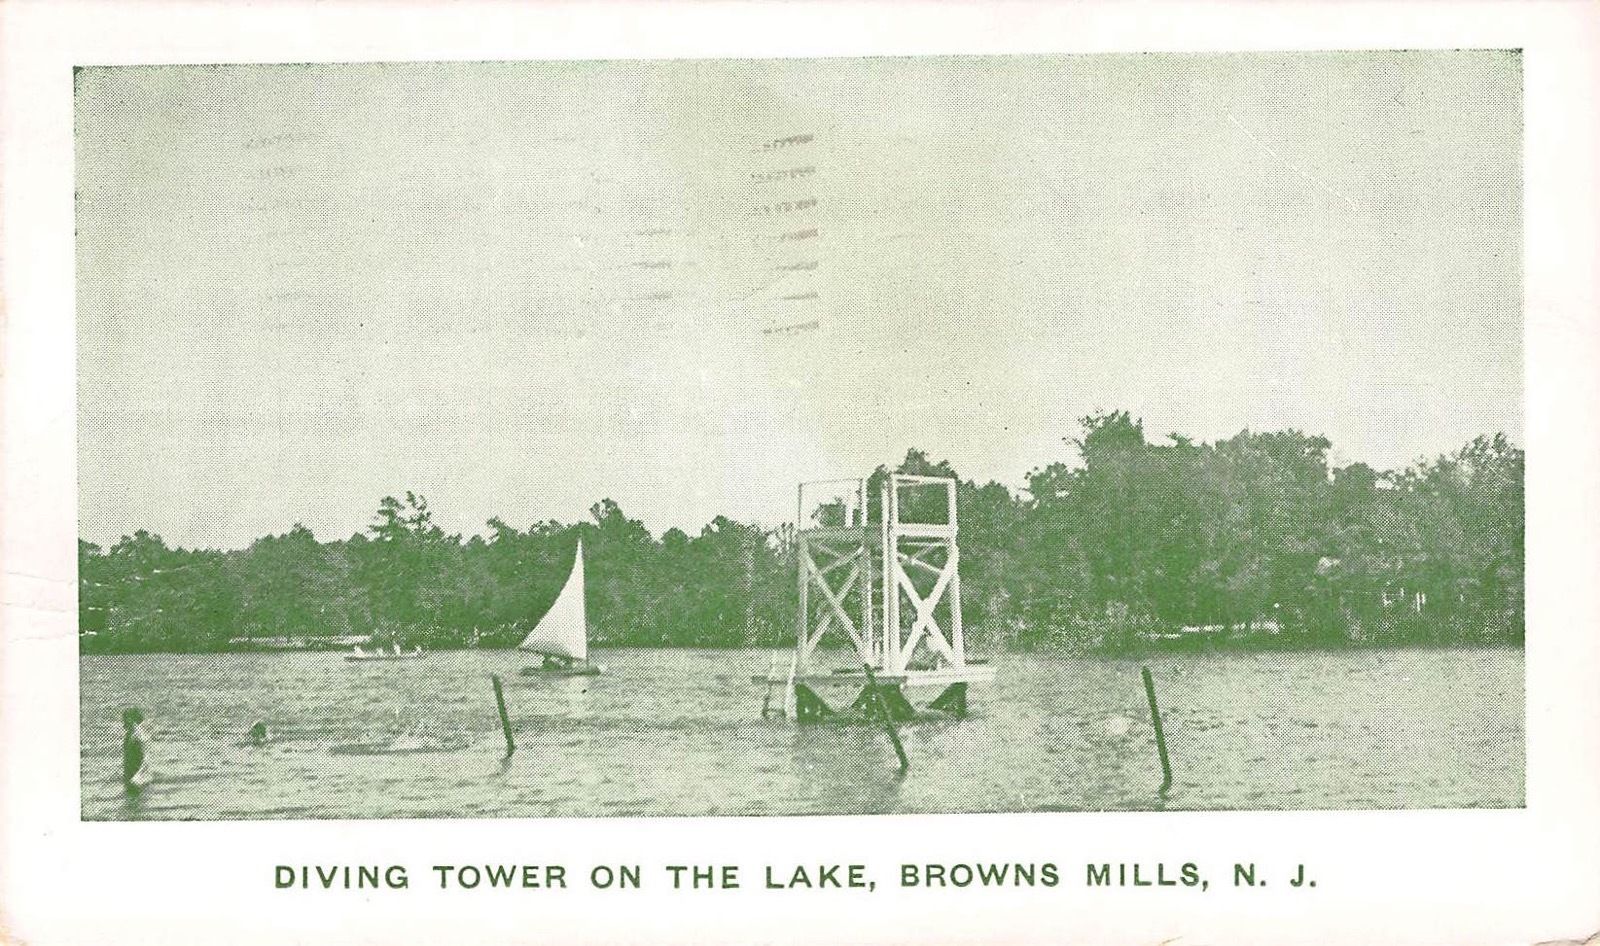 Browns Mills - Diving Tower on the lake